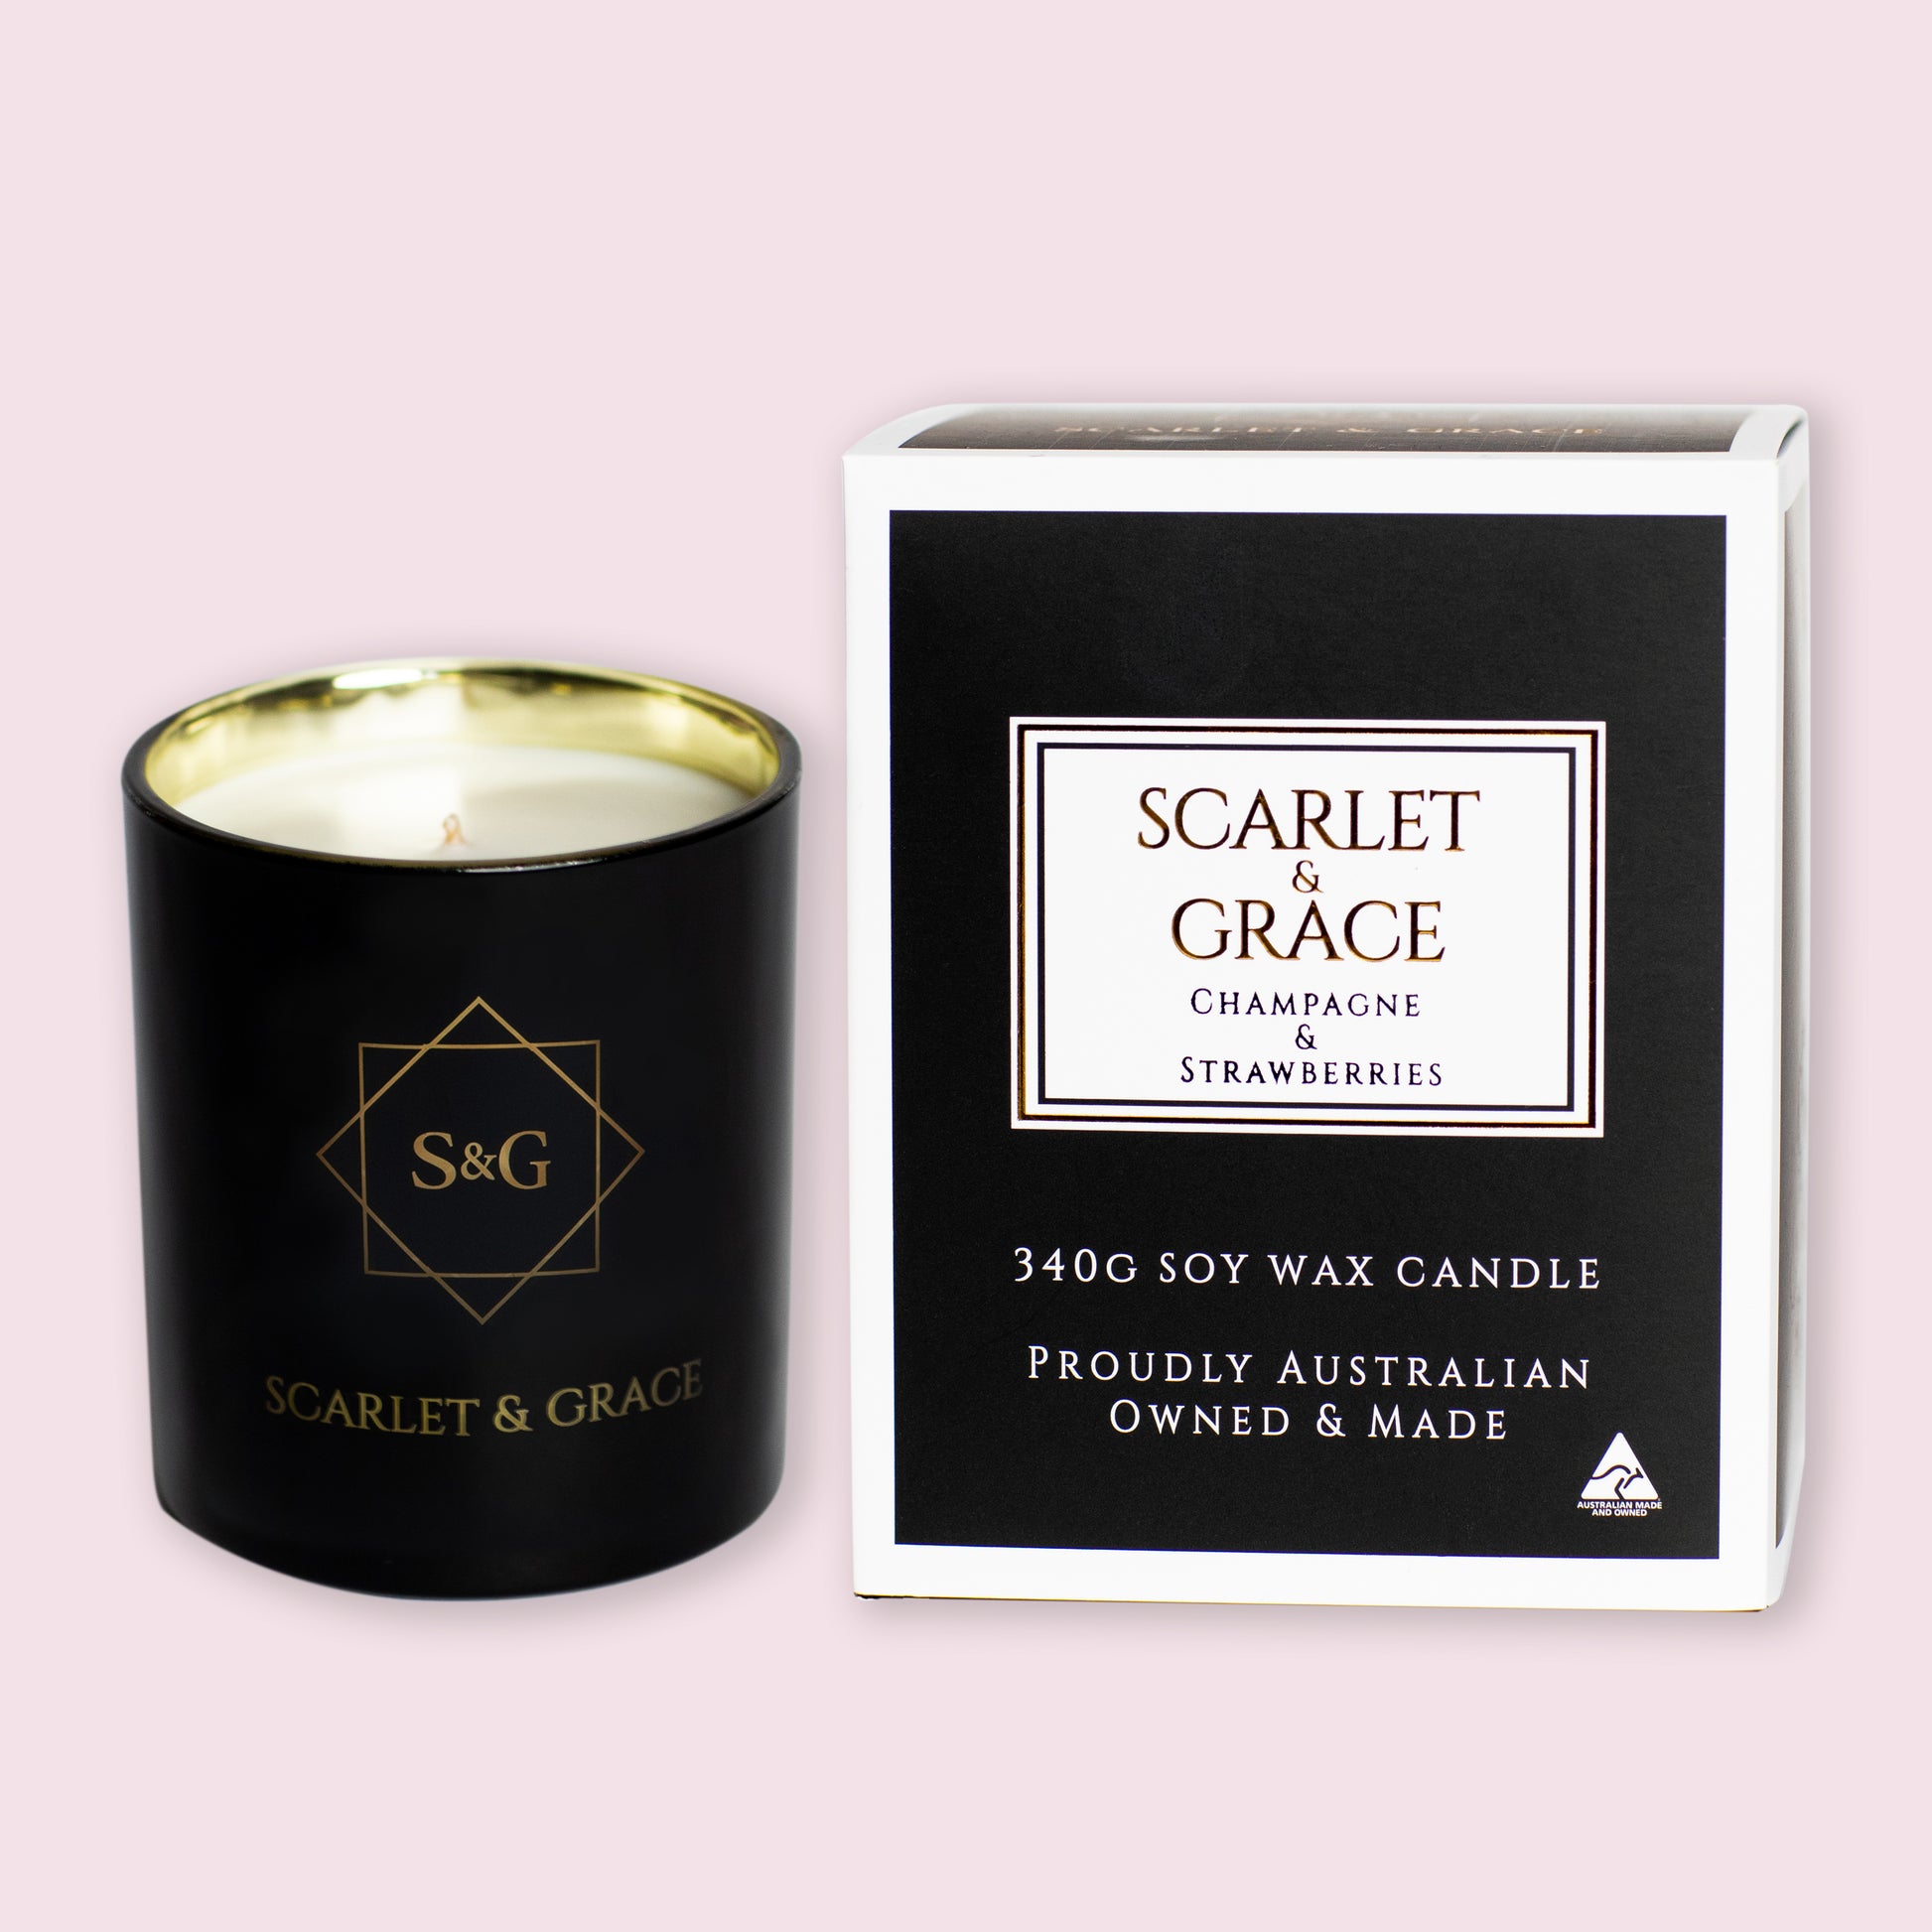 Champagne & Strawberries - 340gm Soy Wax Candle - Scarlet & Grace